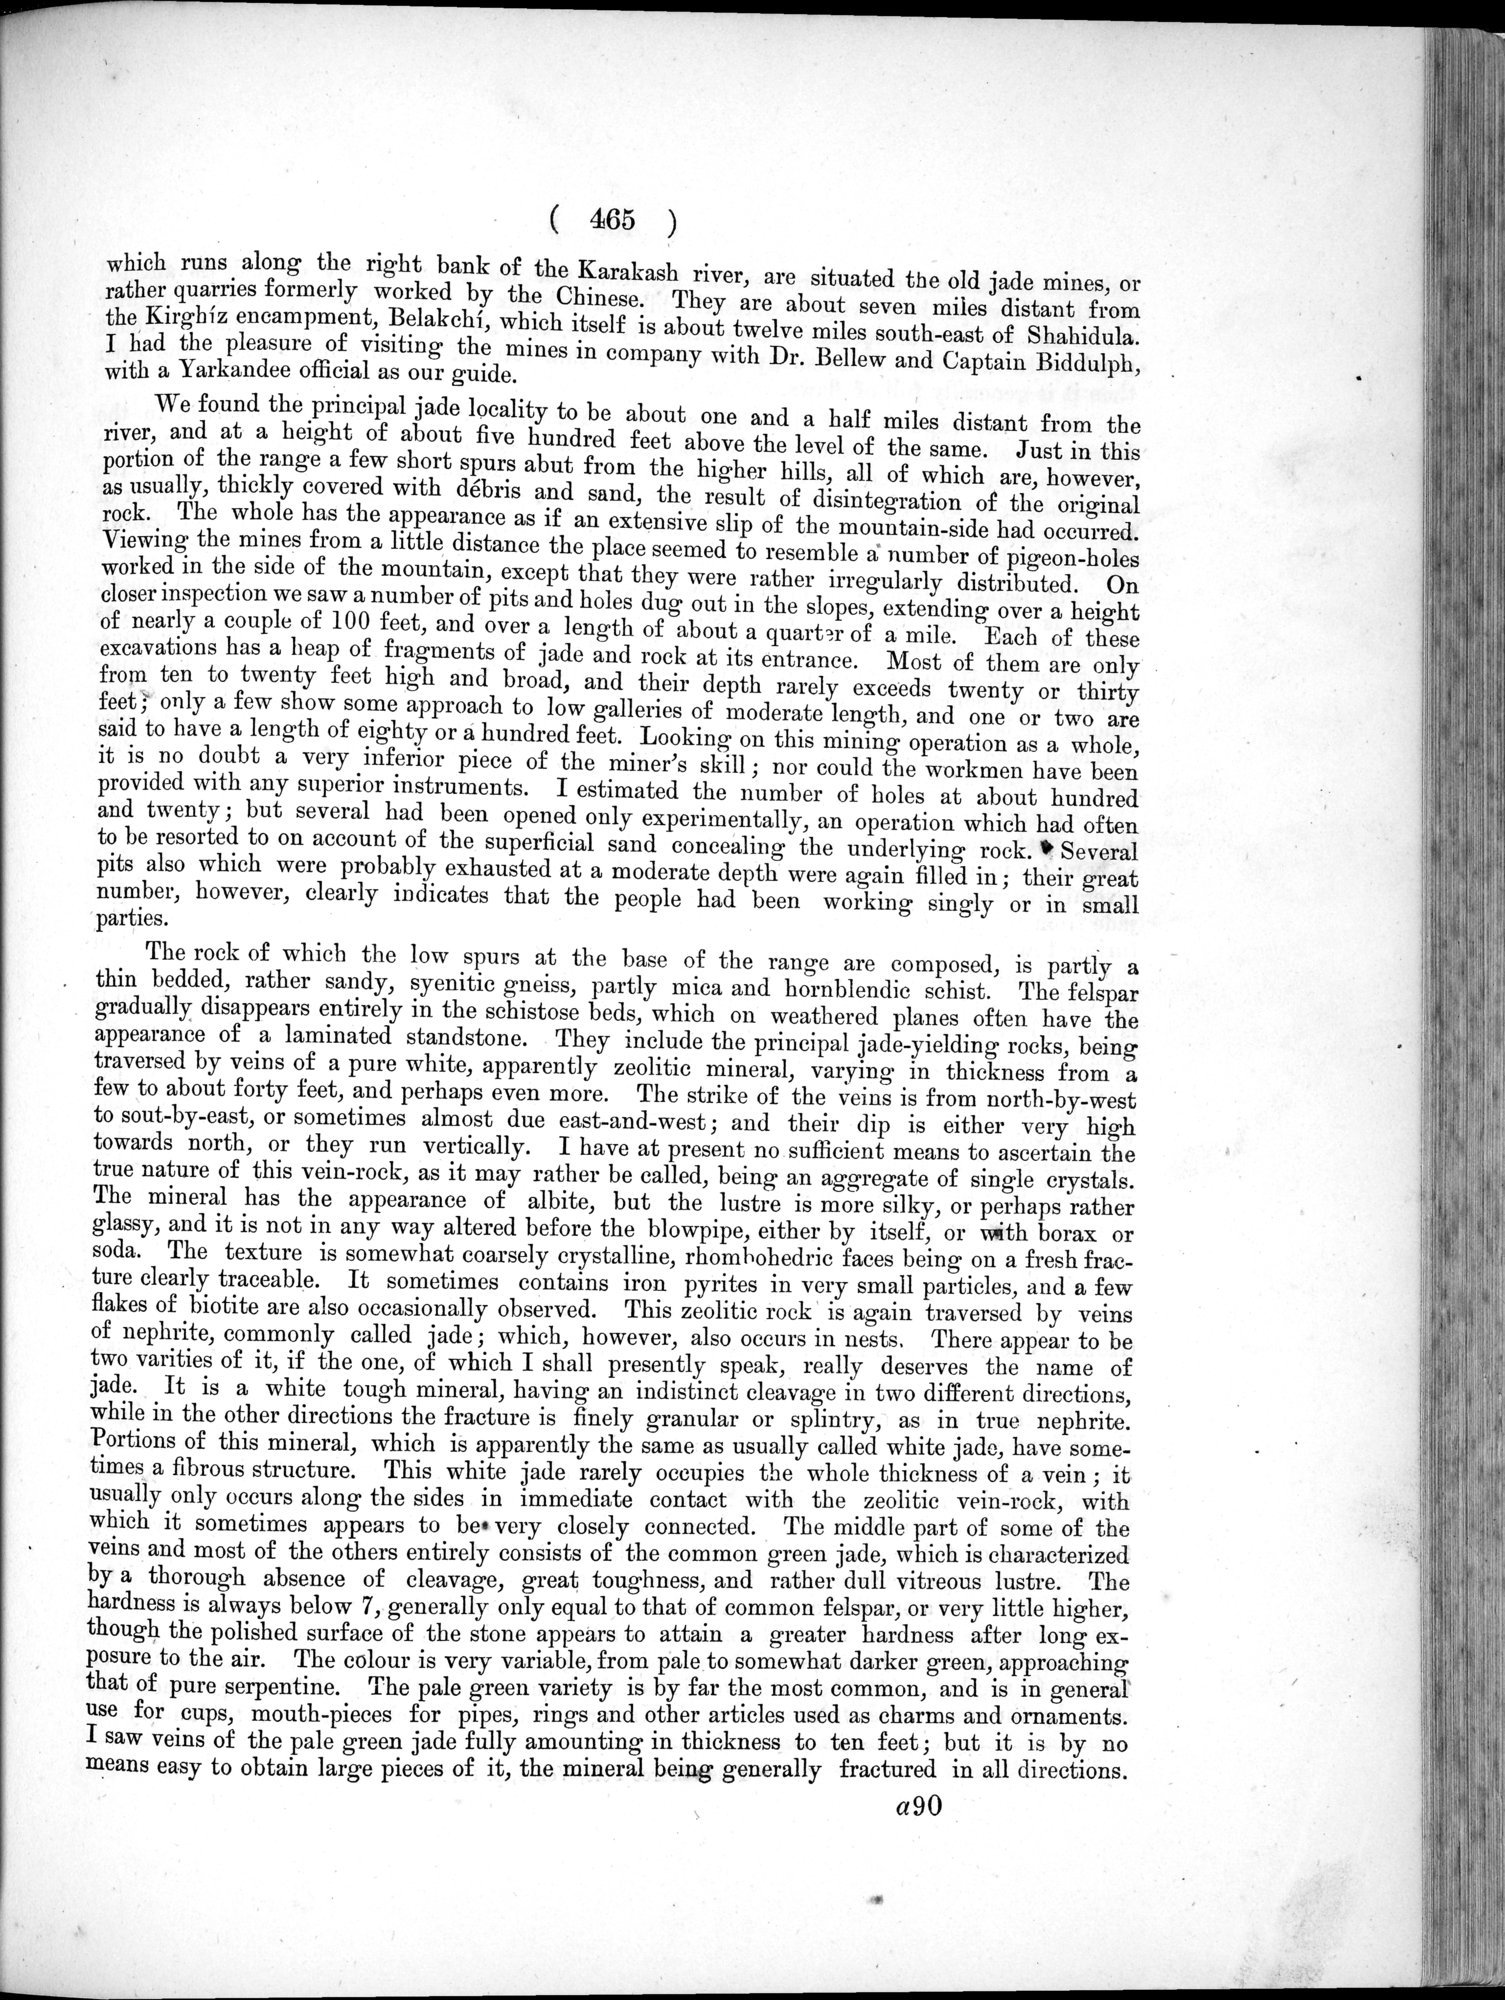 Report of a Mission to Yarkund in 1873 : vol.1 / Page 599 (Grayscale High Resolution Image)